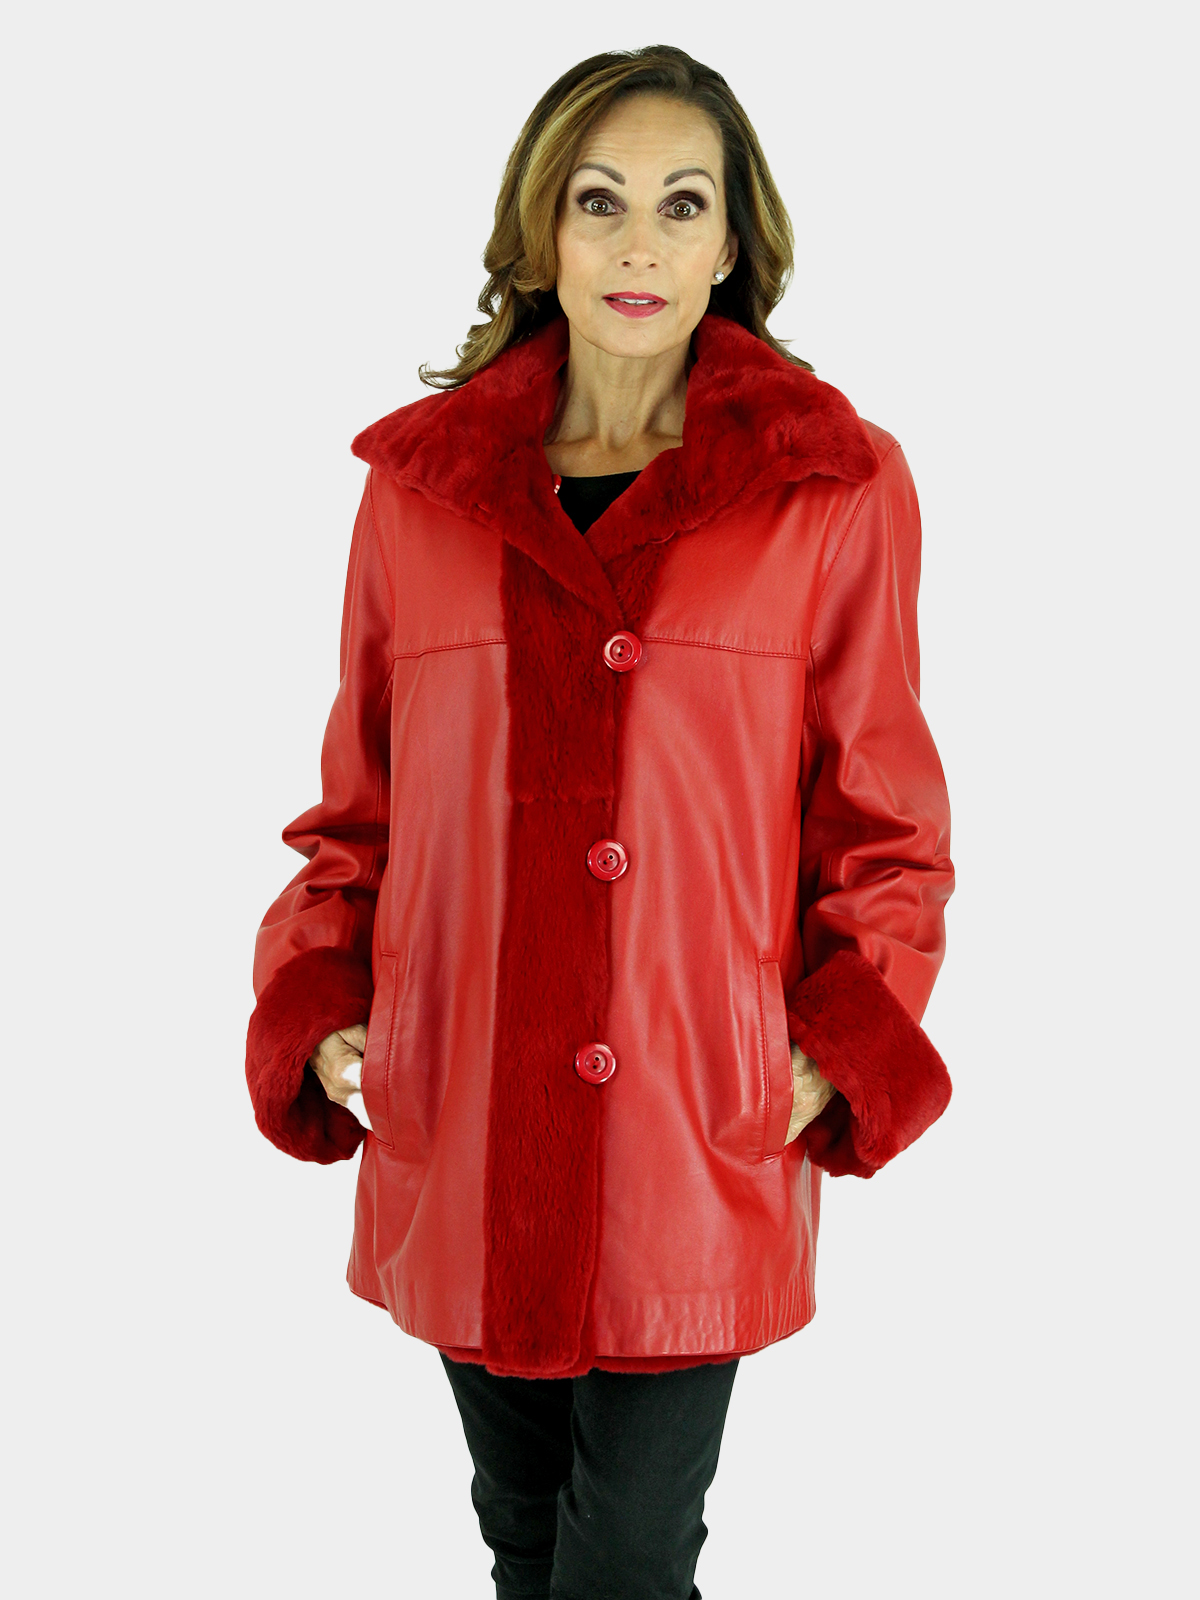 Woman's Red Leather Jacket with Reversible Red Sheared Mink Lining